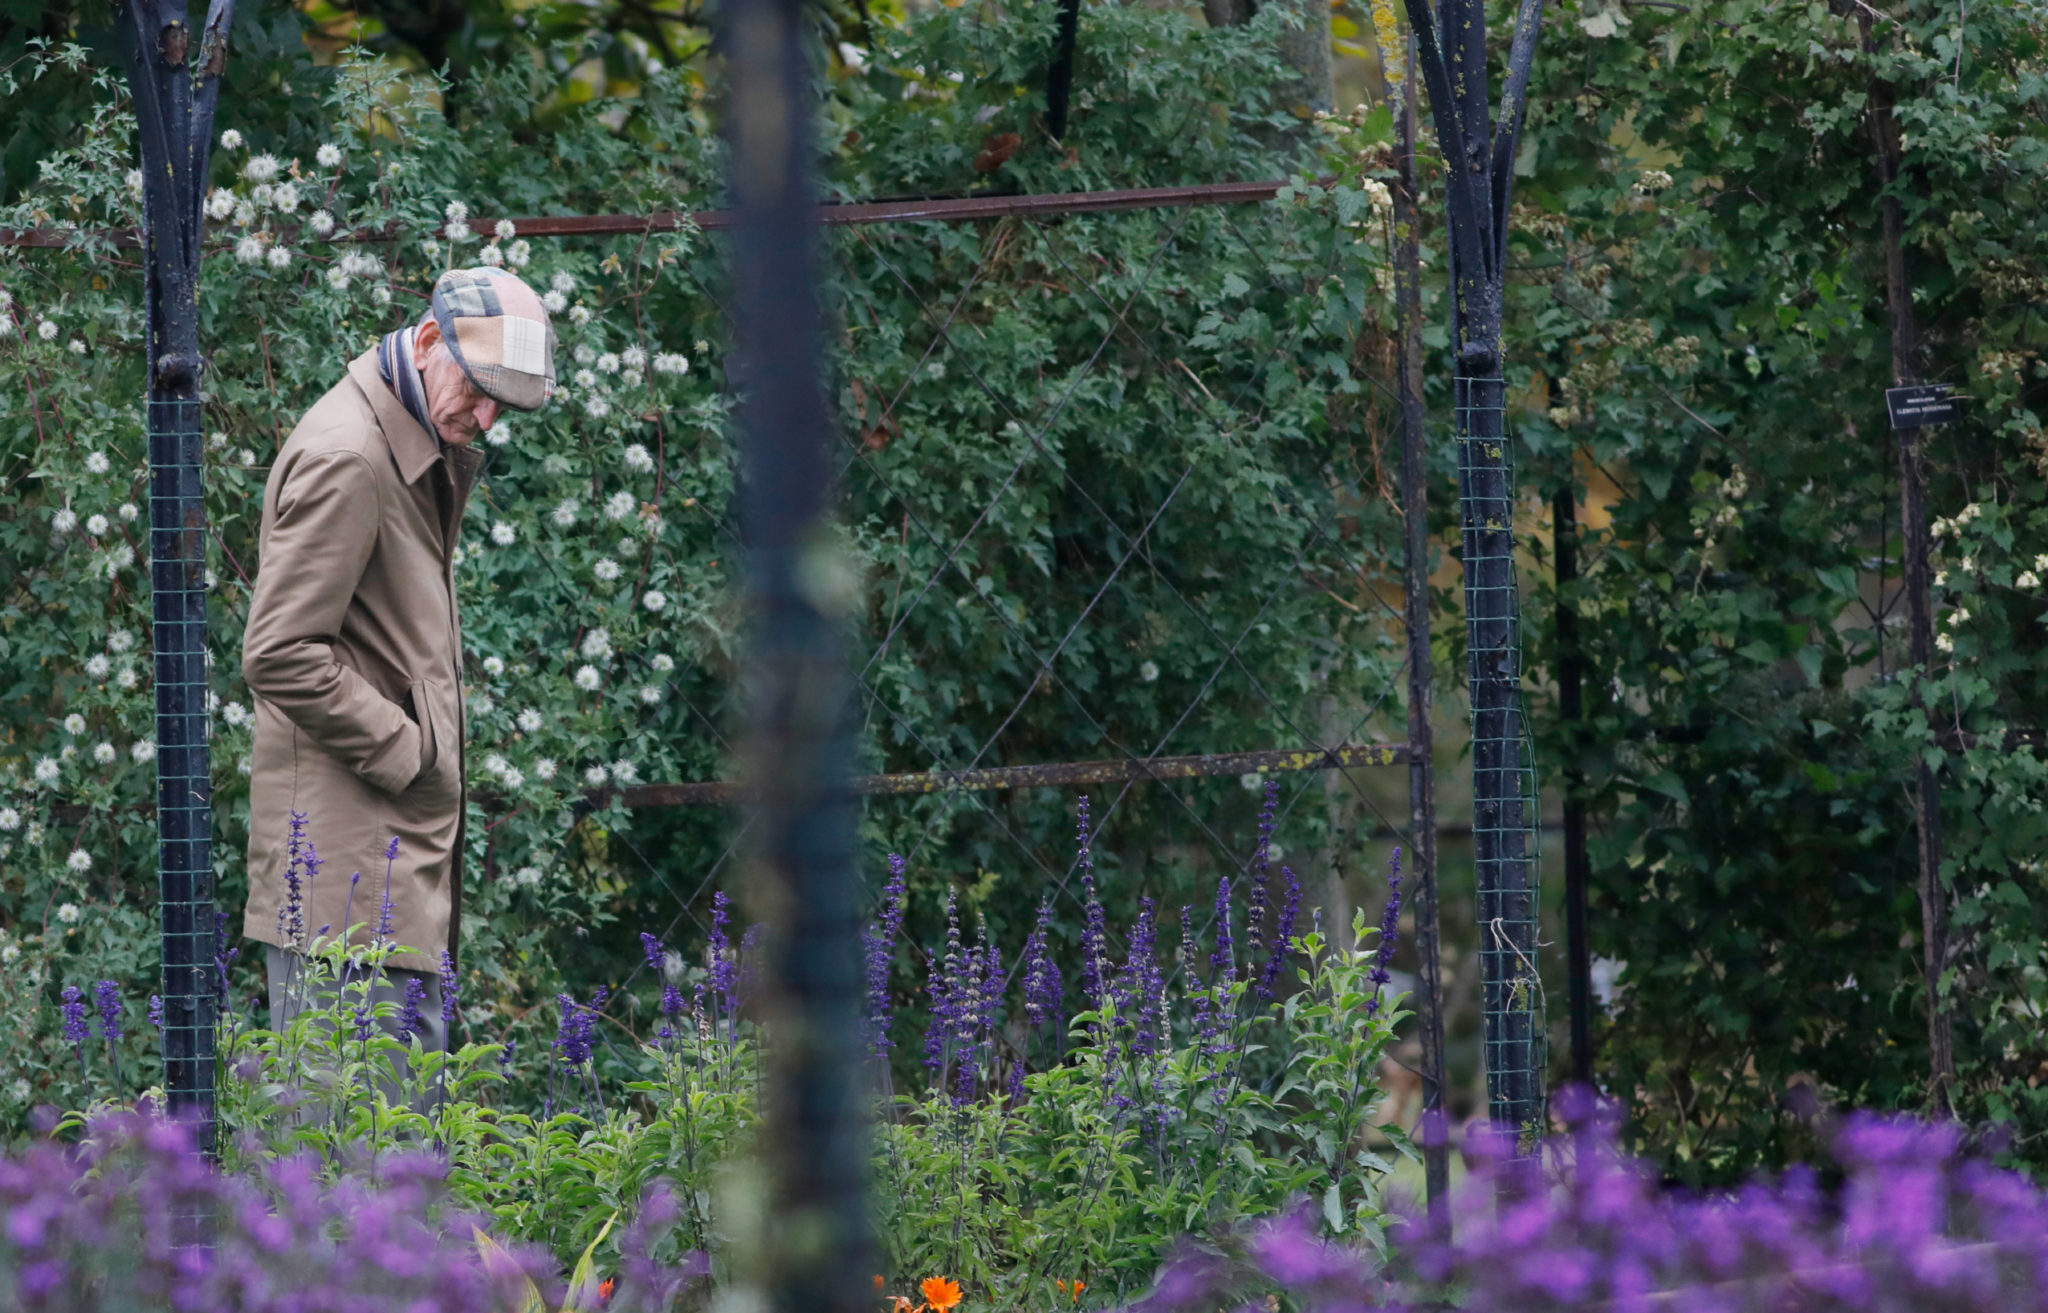 A man admires the flowers in the Botanic Gardens in Dublin